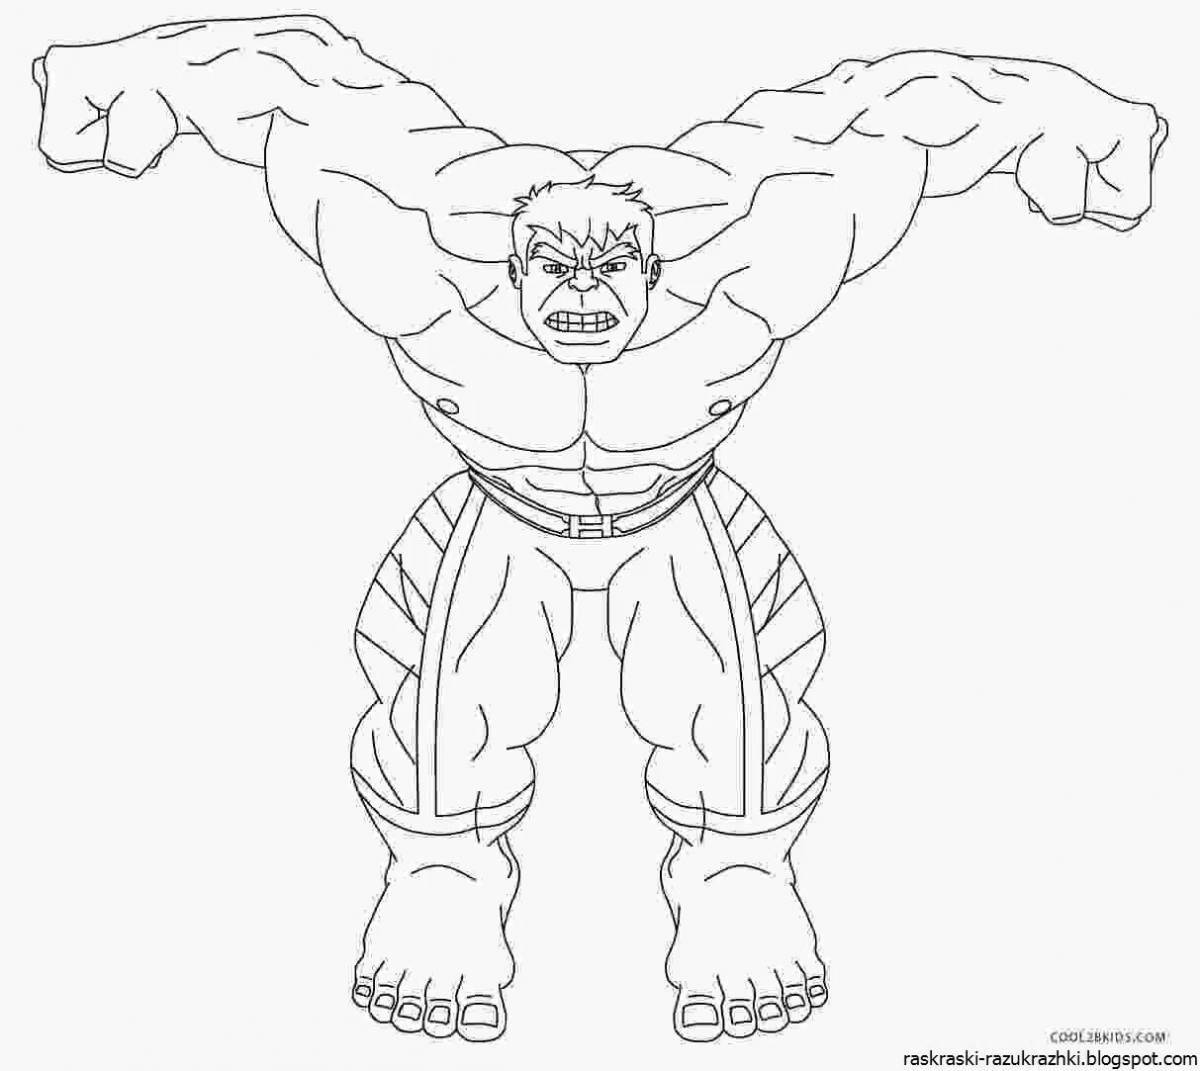 Hulk for kids 6 7 years old #2